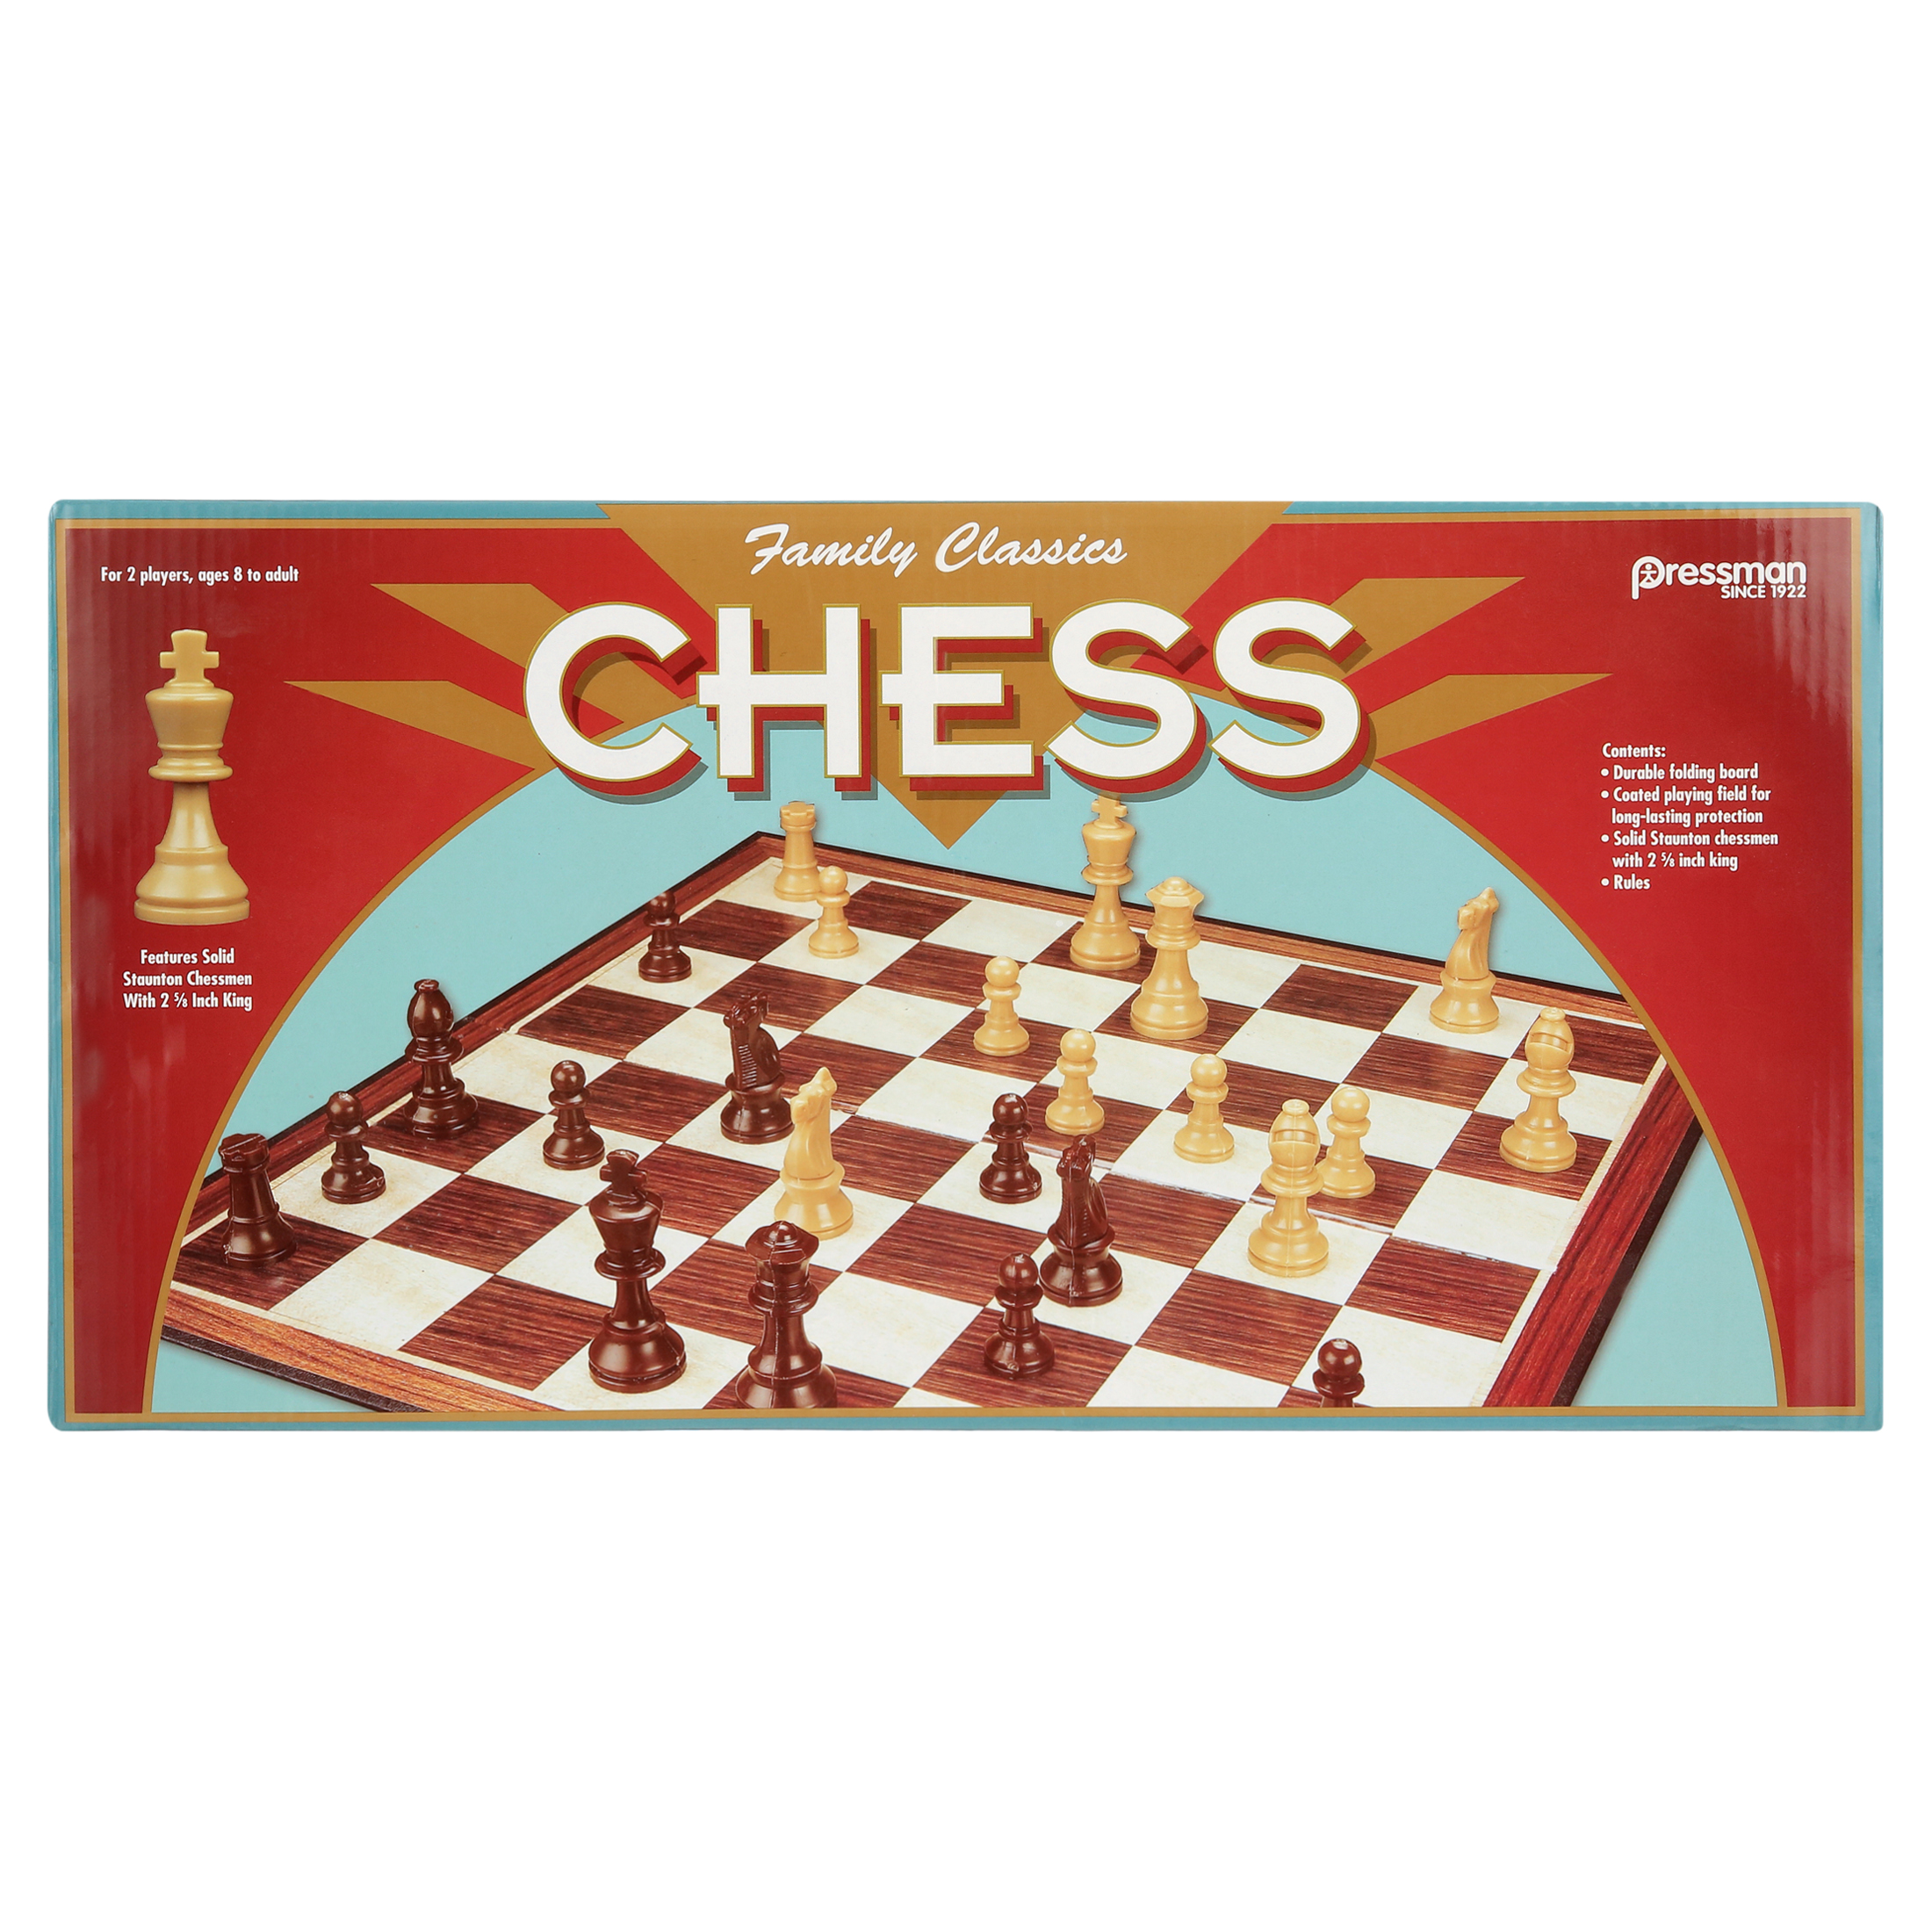 Pressman Toys - Family Classics Chess With Folding Board and Full Size Chess Pieces - image 2 of 6